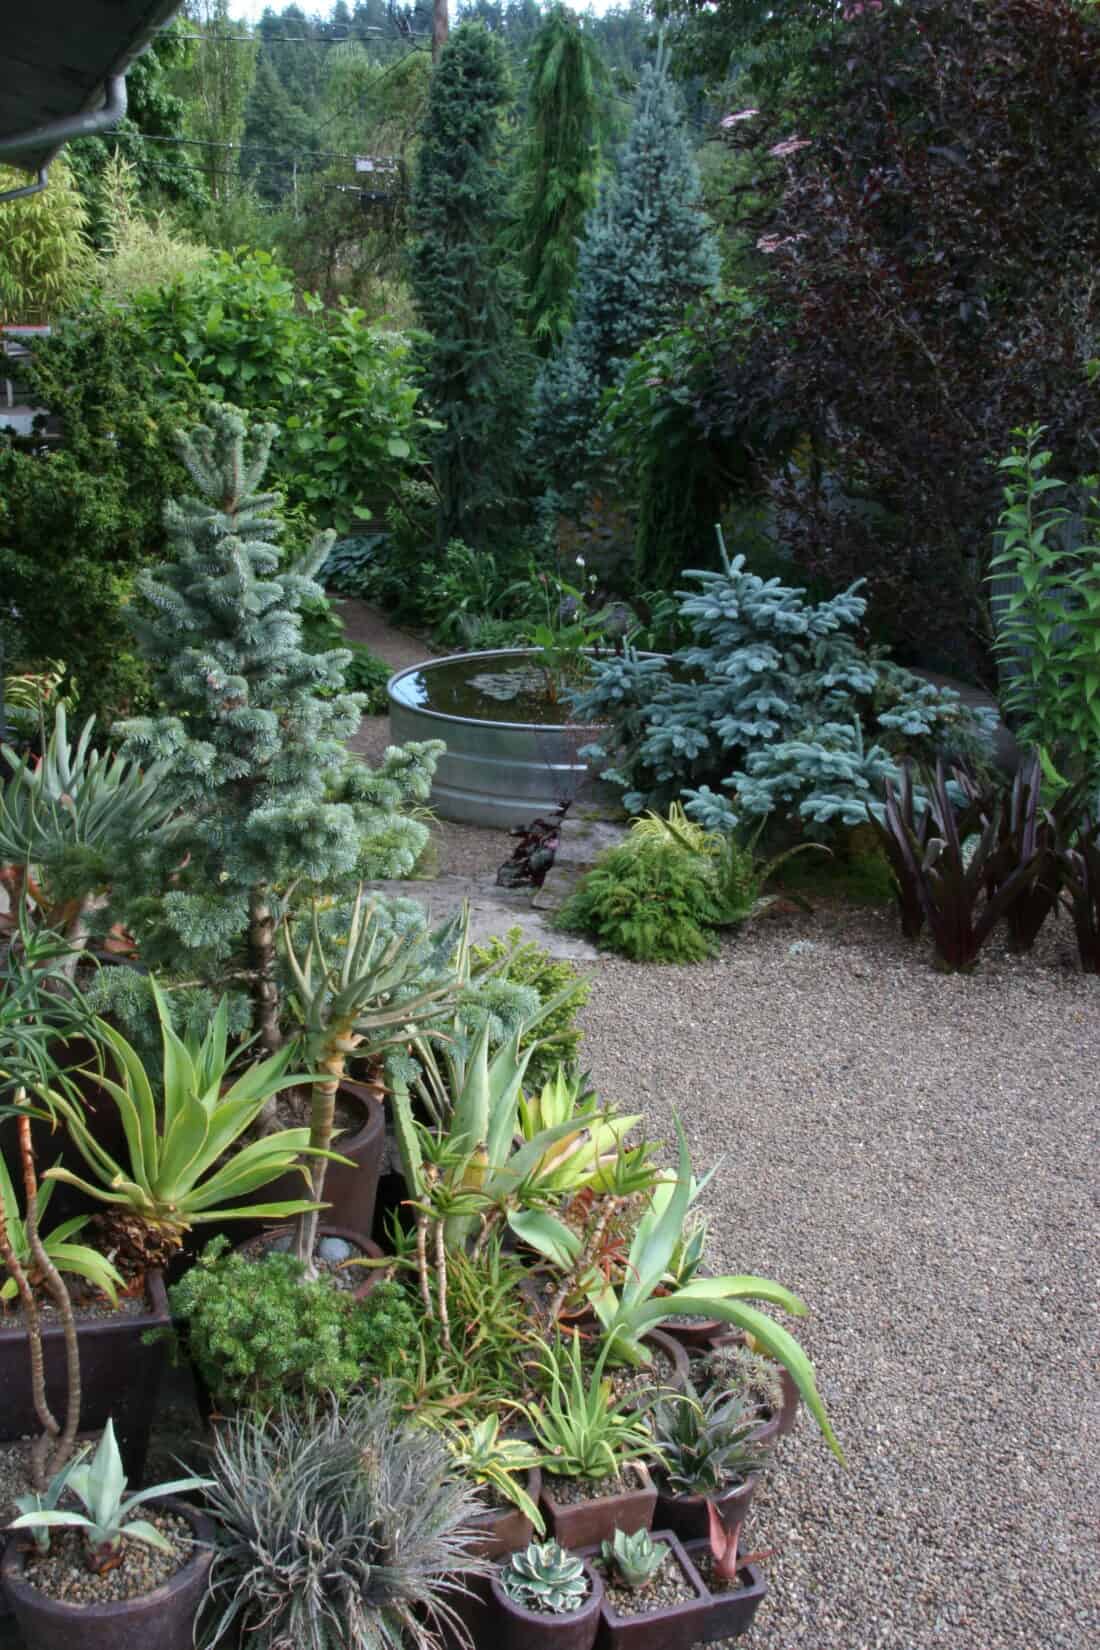 A serene garden with a variety of plants and a small circular pond, demonstrating lush landscaping.